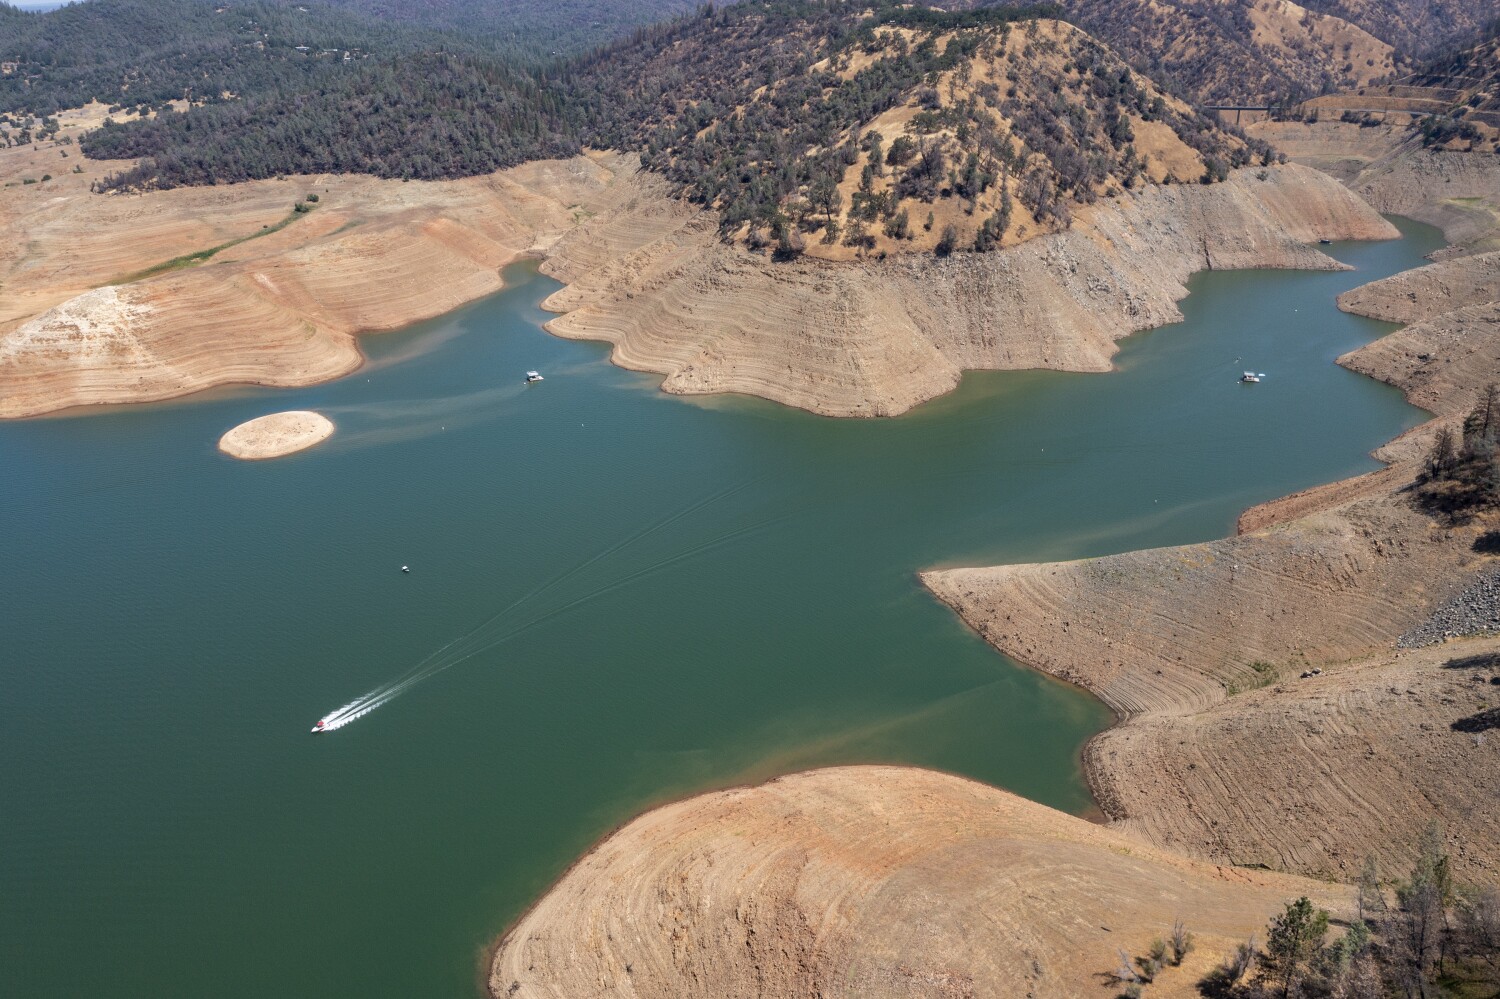 California will consider mandatory water restrictions if dryness continues this winter